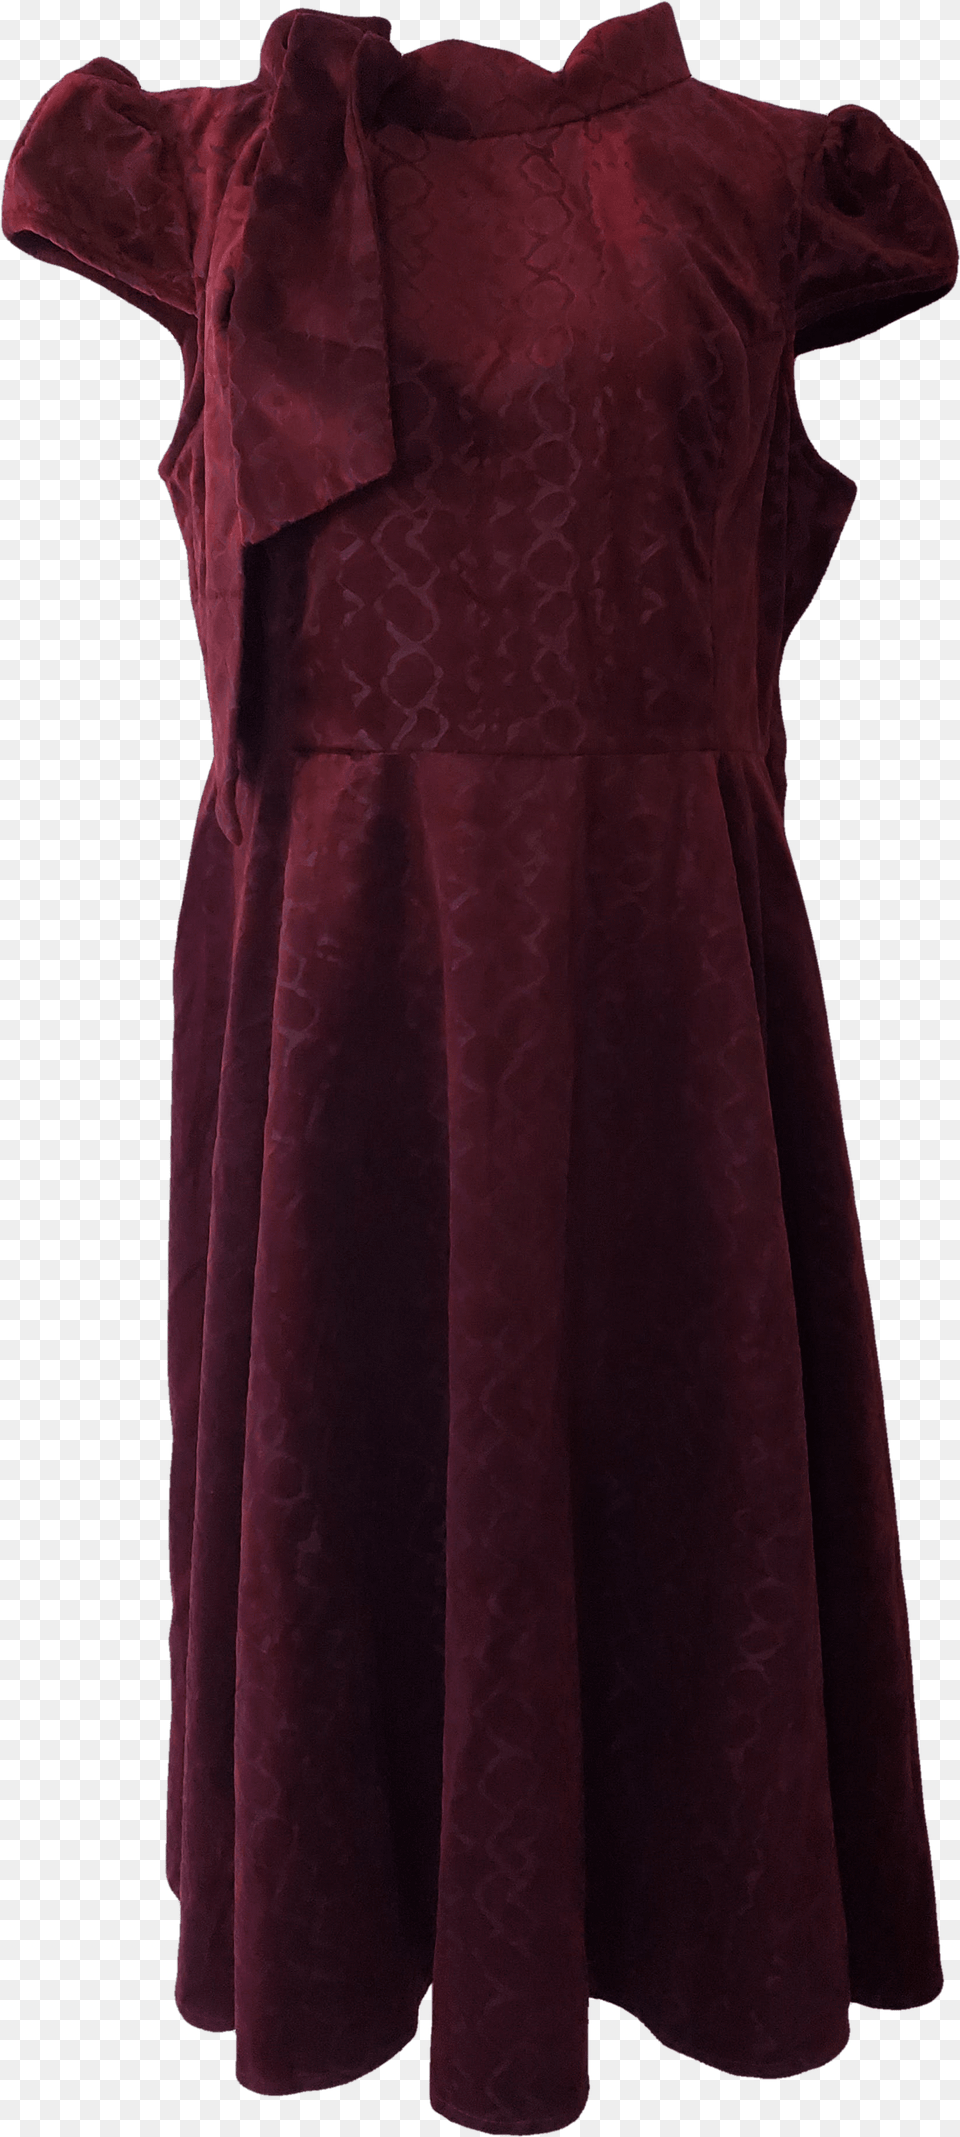 Red Velvet Pattern Dress With Tie Neck By Hearts And Gown, Clothing, Fashion, Coat, Maroon Free Png Download